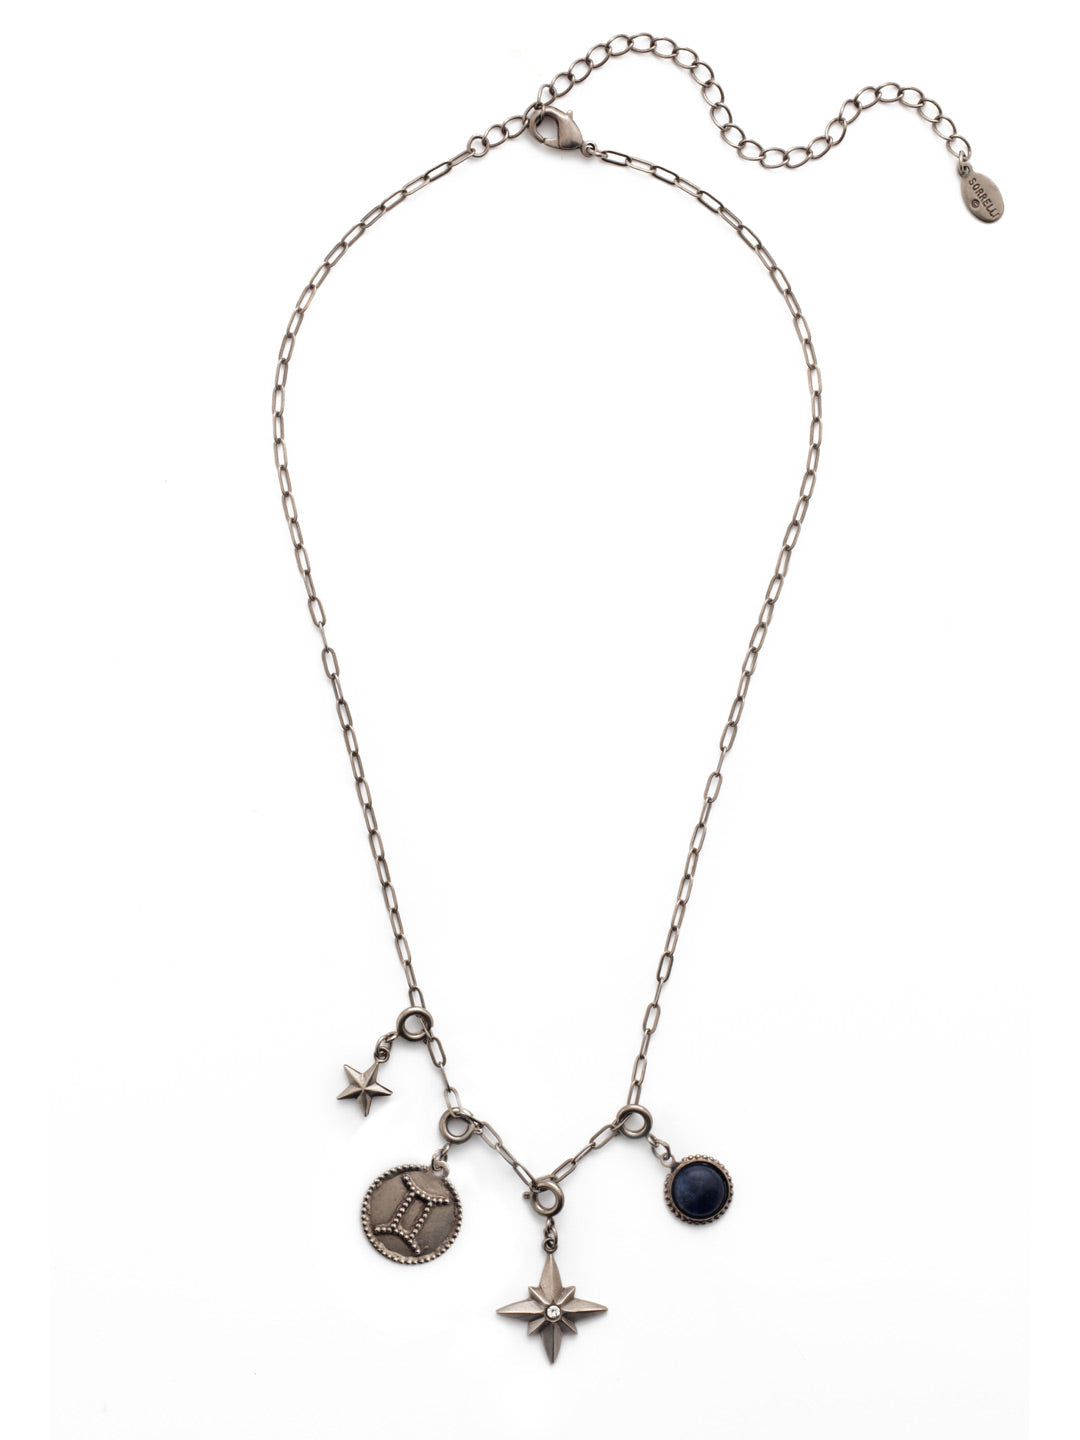 Gemini Pendant Necklace - 4NEU90ASIND - <p>Let everyone know your sign! The Gemini Pendant necklace has a beautiful medallion charm with your astological symbol on it. The pendant hangs from a simple yet modern link chain. From Sorrelli's Industrial collection in our Antique Silver-tone finish.</p>